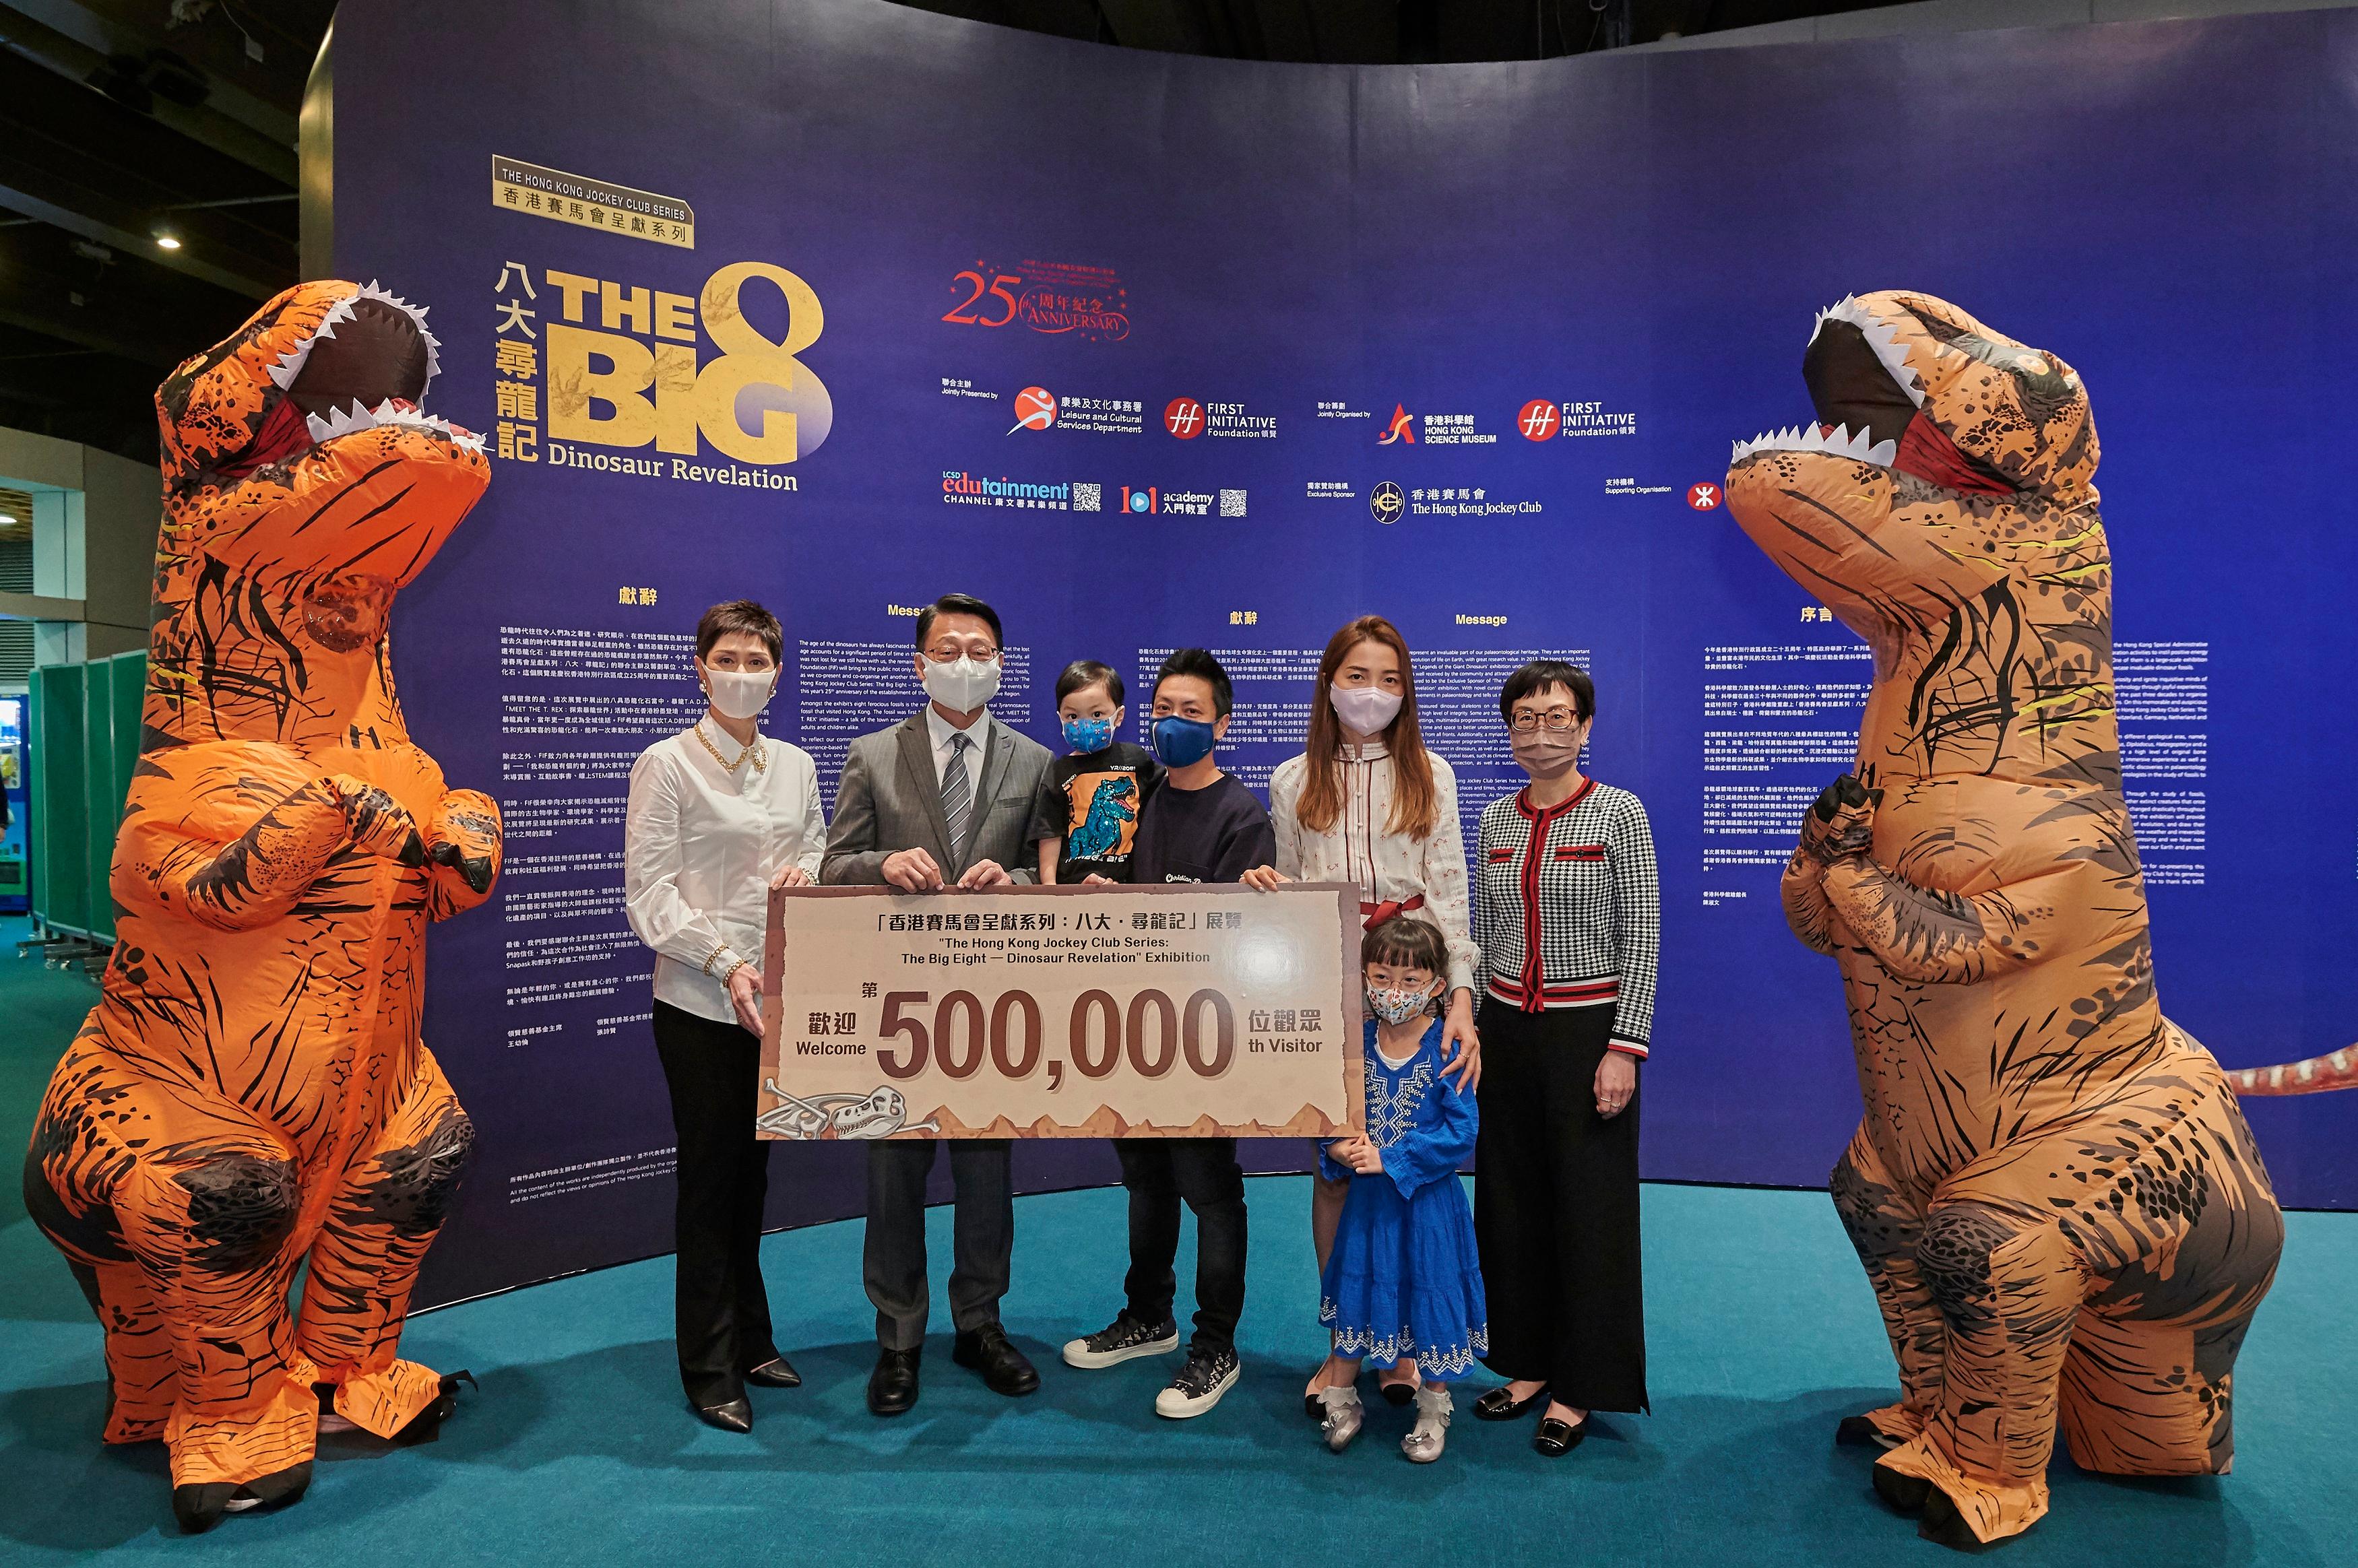 The Hong Kong Science Museum's free large-scale dinosaur exhibition, "The Hong Kong Jockey Club Series: The Big Eight - Dinosaur Revelation" has received an overwhelming public response since its opening in July. The exhibition received its 500,000th visitor this afternoon (October 10). Picture shows the Director of Leisure and Cultural Services, Mr Vincent Liu (second left); Executive Manager, Charities (Sports and Culture) of the Hong Kong Jockey Club Ms Winnie Yip (first right); and the Chairman of the First Initiative Foundation, Ms Michelle Ong (first left), welcoming the 500,000th visitor.